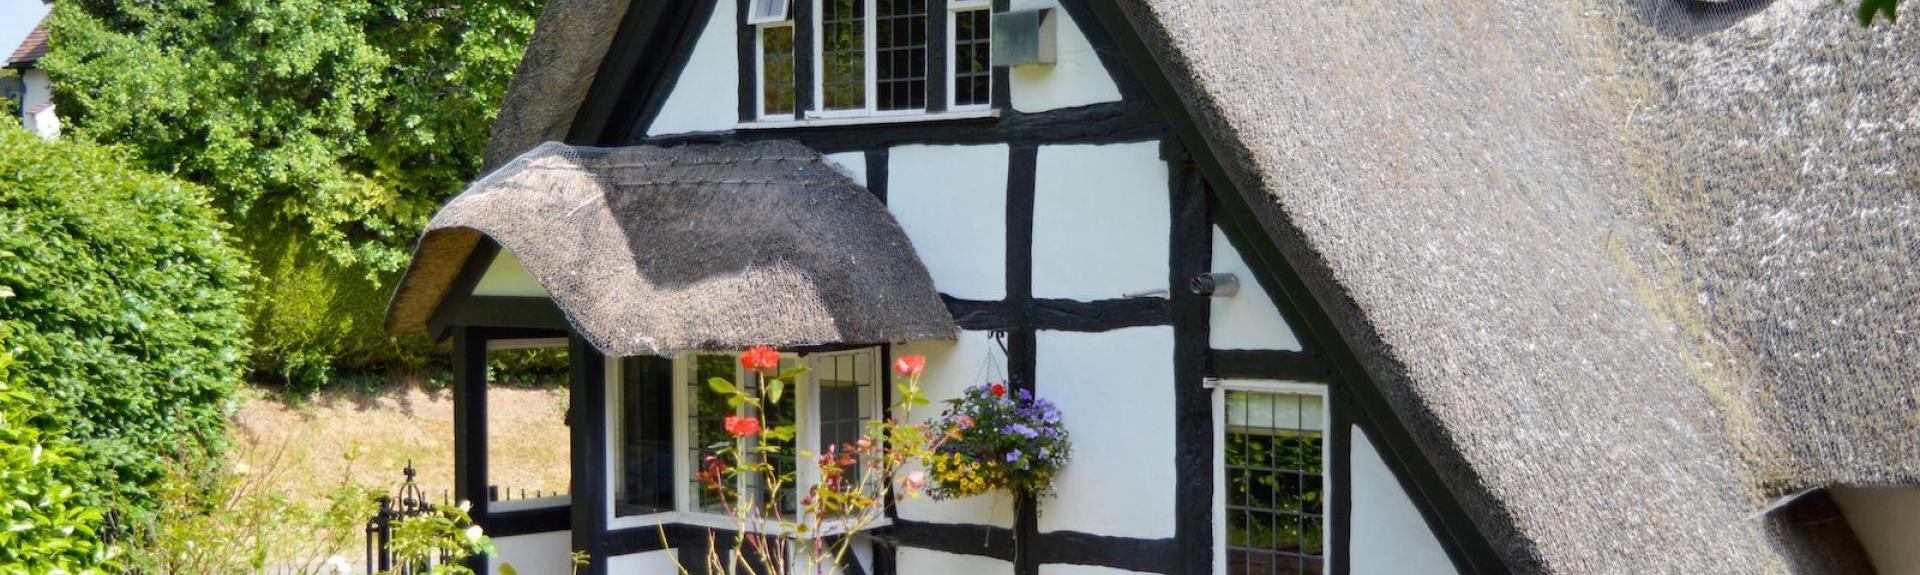 Gable end of a half-timbered thatched cottage with the roof reaching right to the ground.